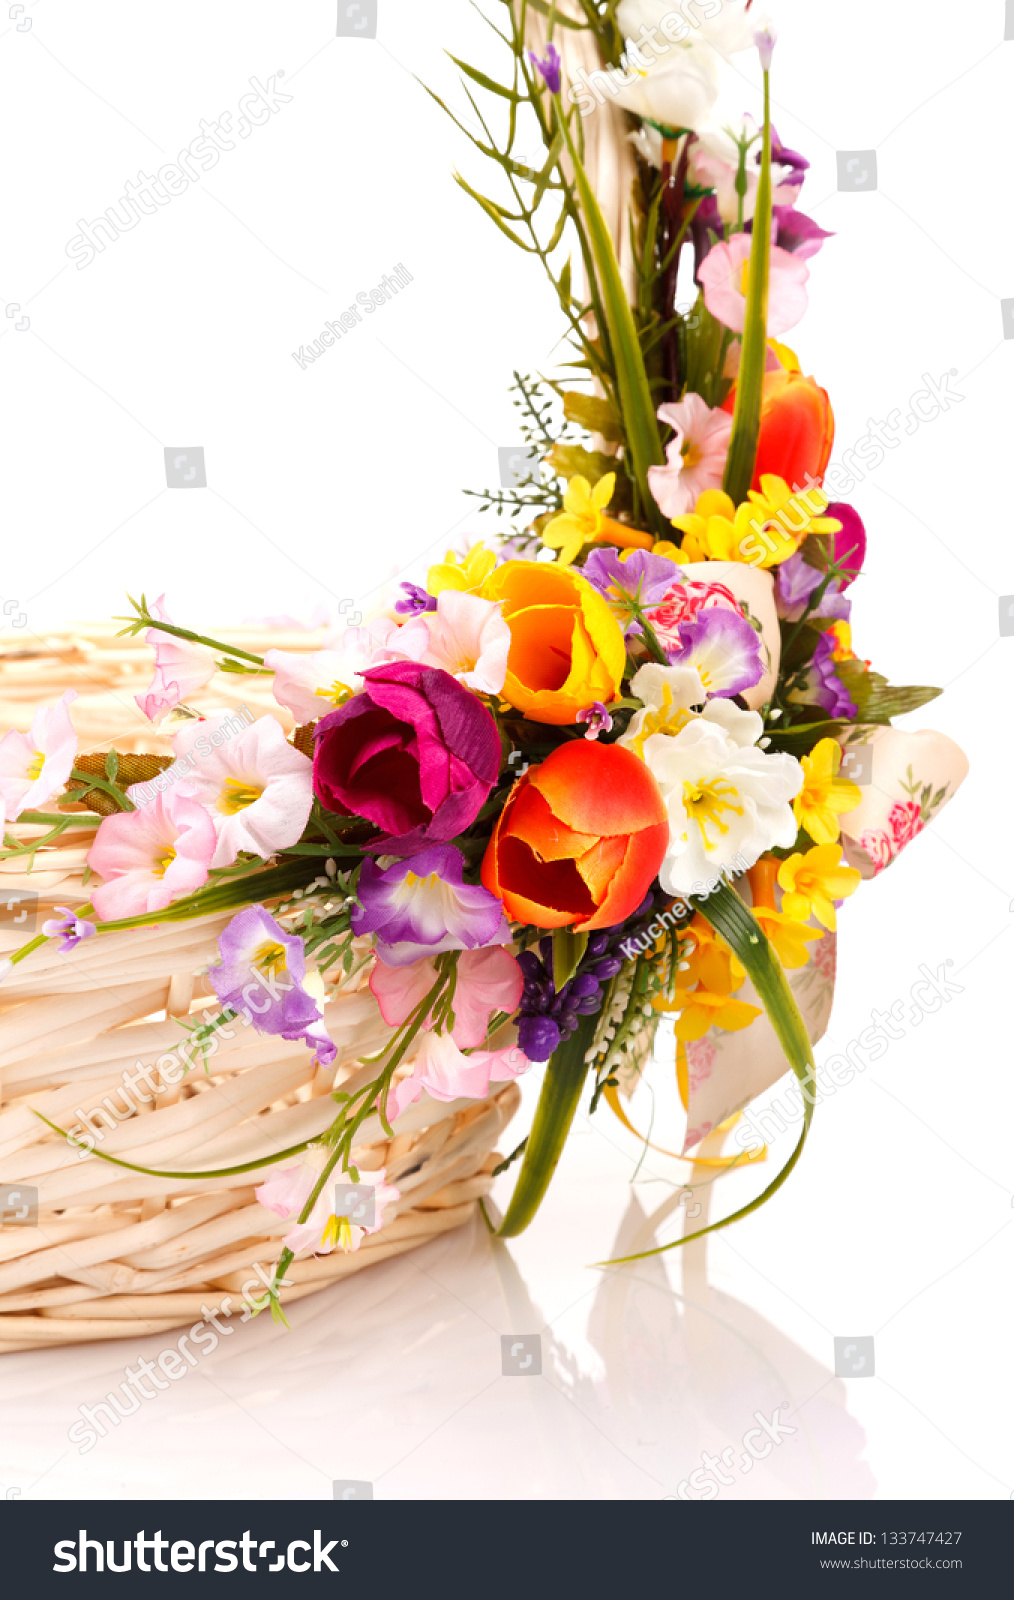 Artificial Flowers On A White Background Stock Photo 133747427